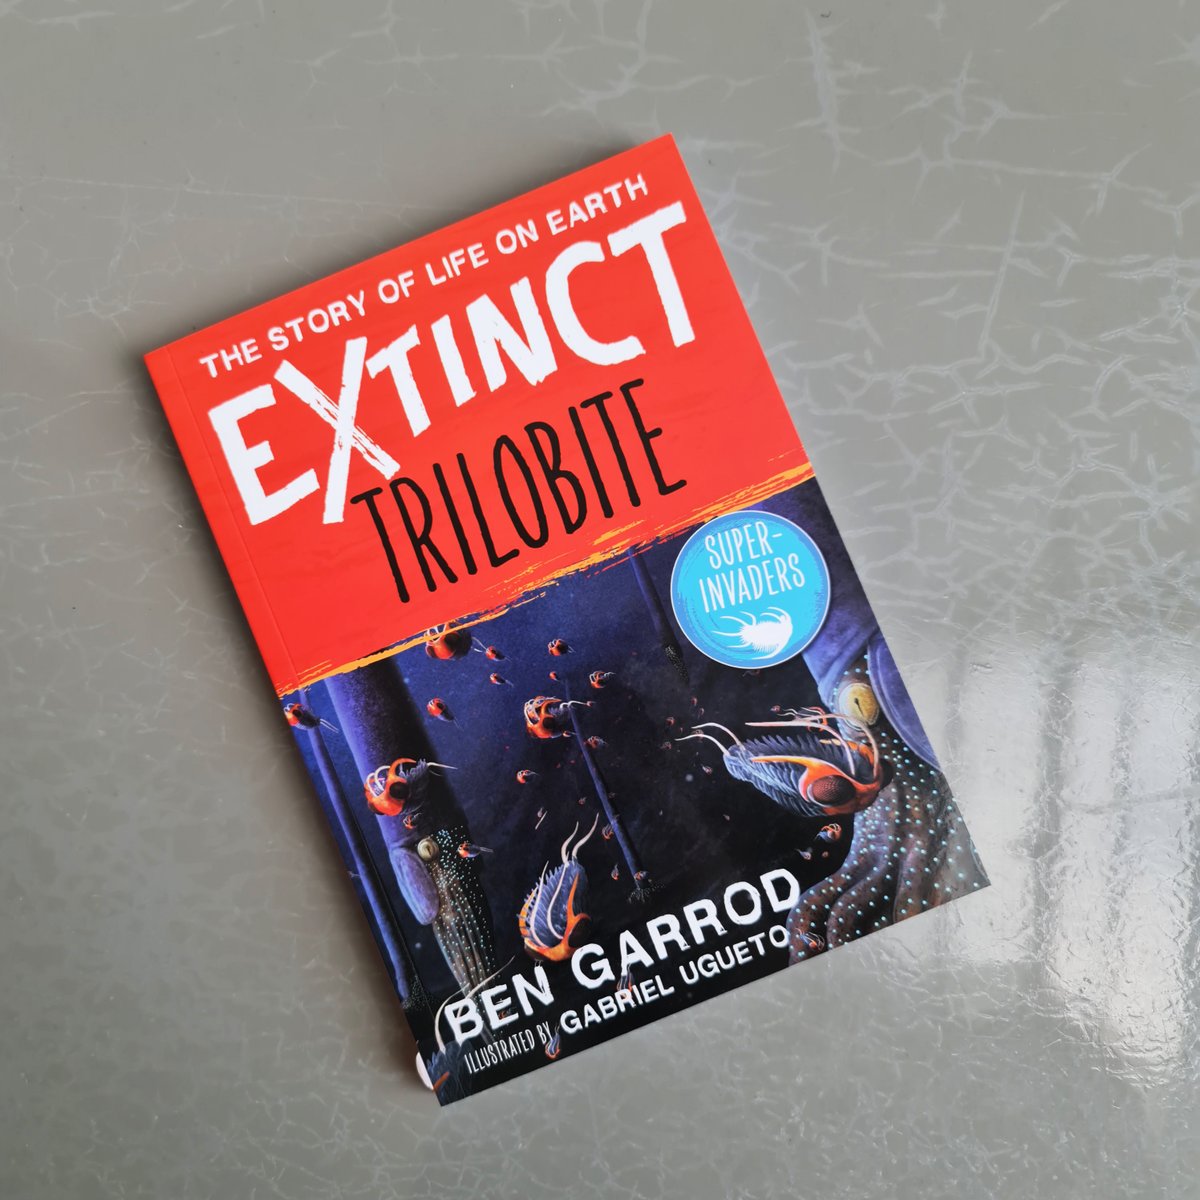 Have you heard of our favourite super-invaders the #Trilobite? ⭐ There were over 20,000 species They survived for 300 million years Their stomach was in their head Find out more in @Ben_garrod & @SerpenIllus' #Extinct series, out in paperback Nov 10th bit.ly/3CvIuNx